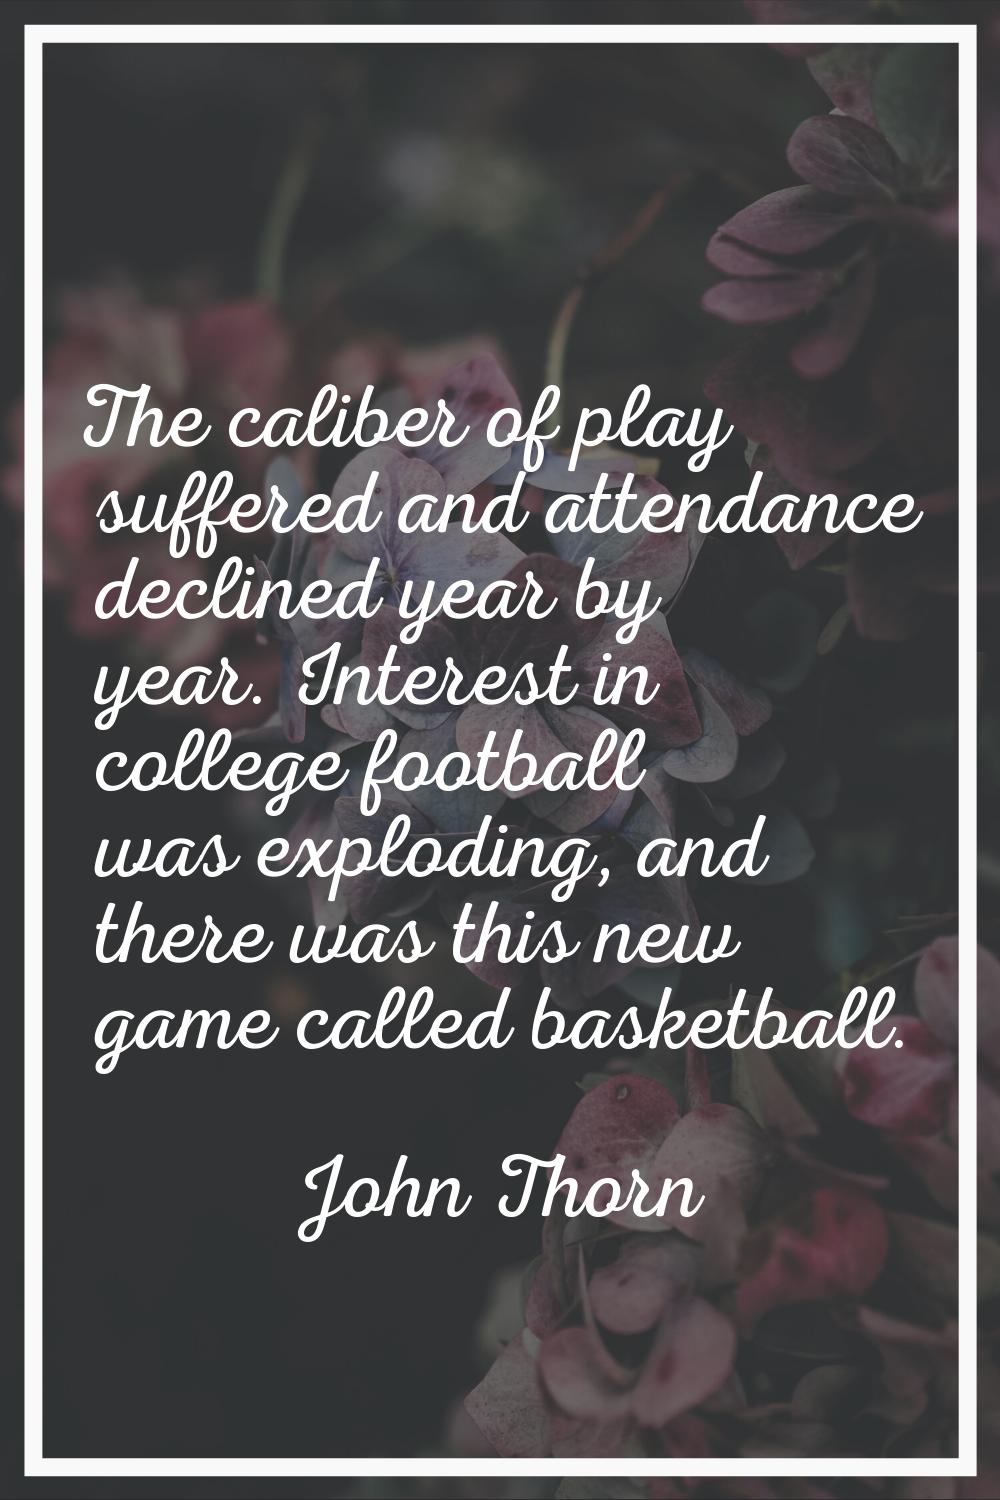 The caliber of play suffered and attendance declined year by year. Interest in college football was